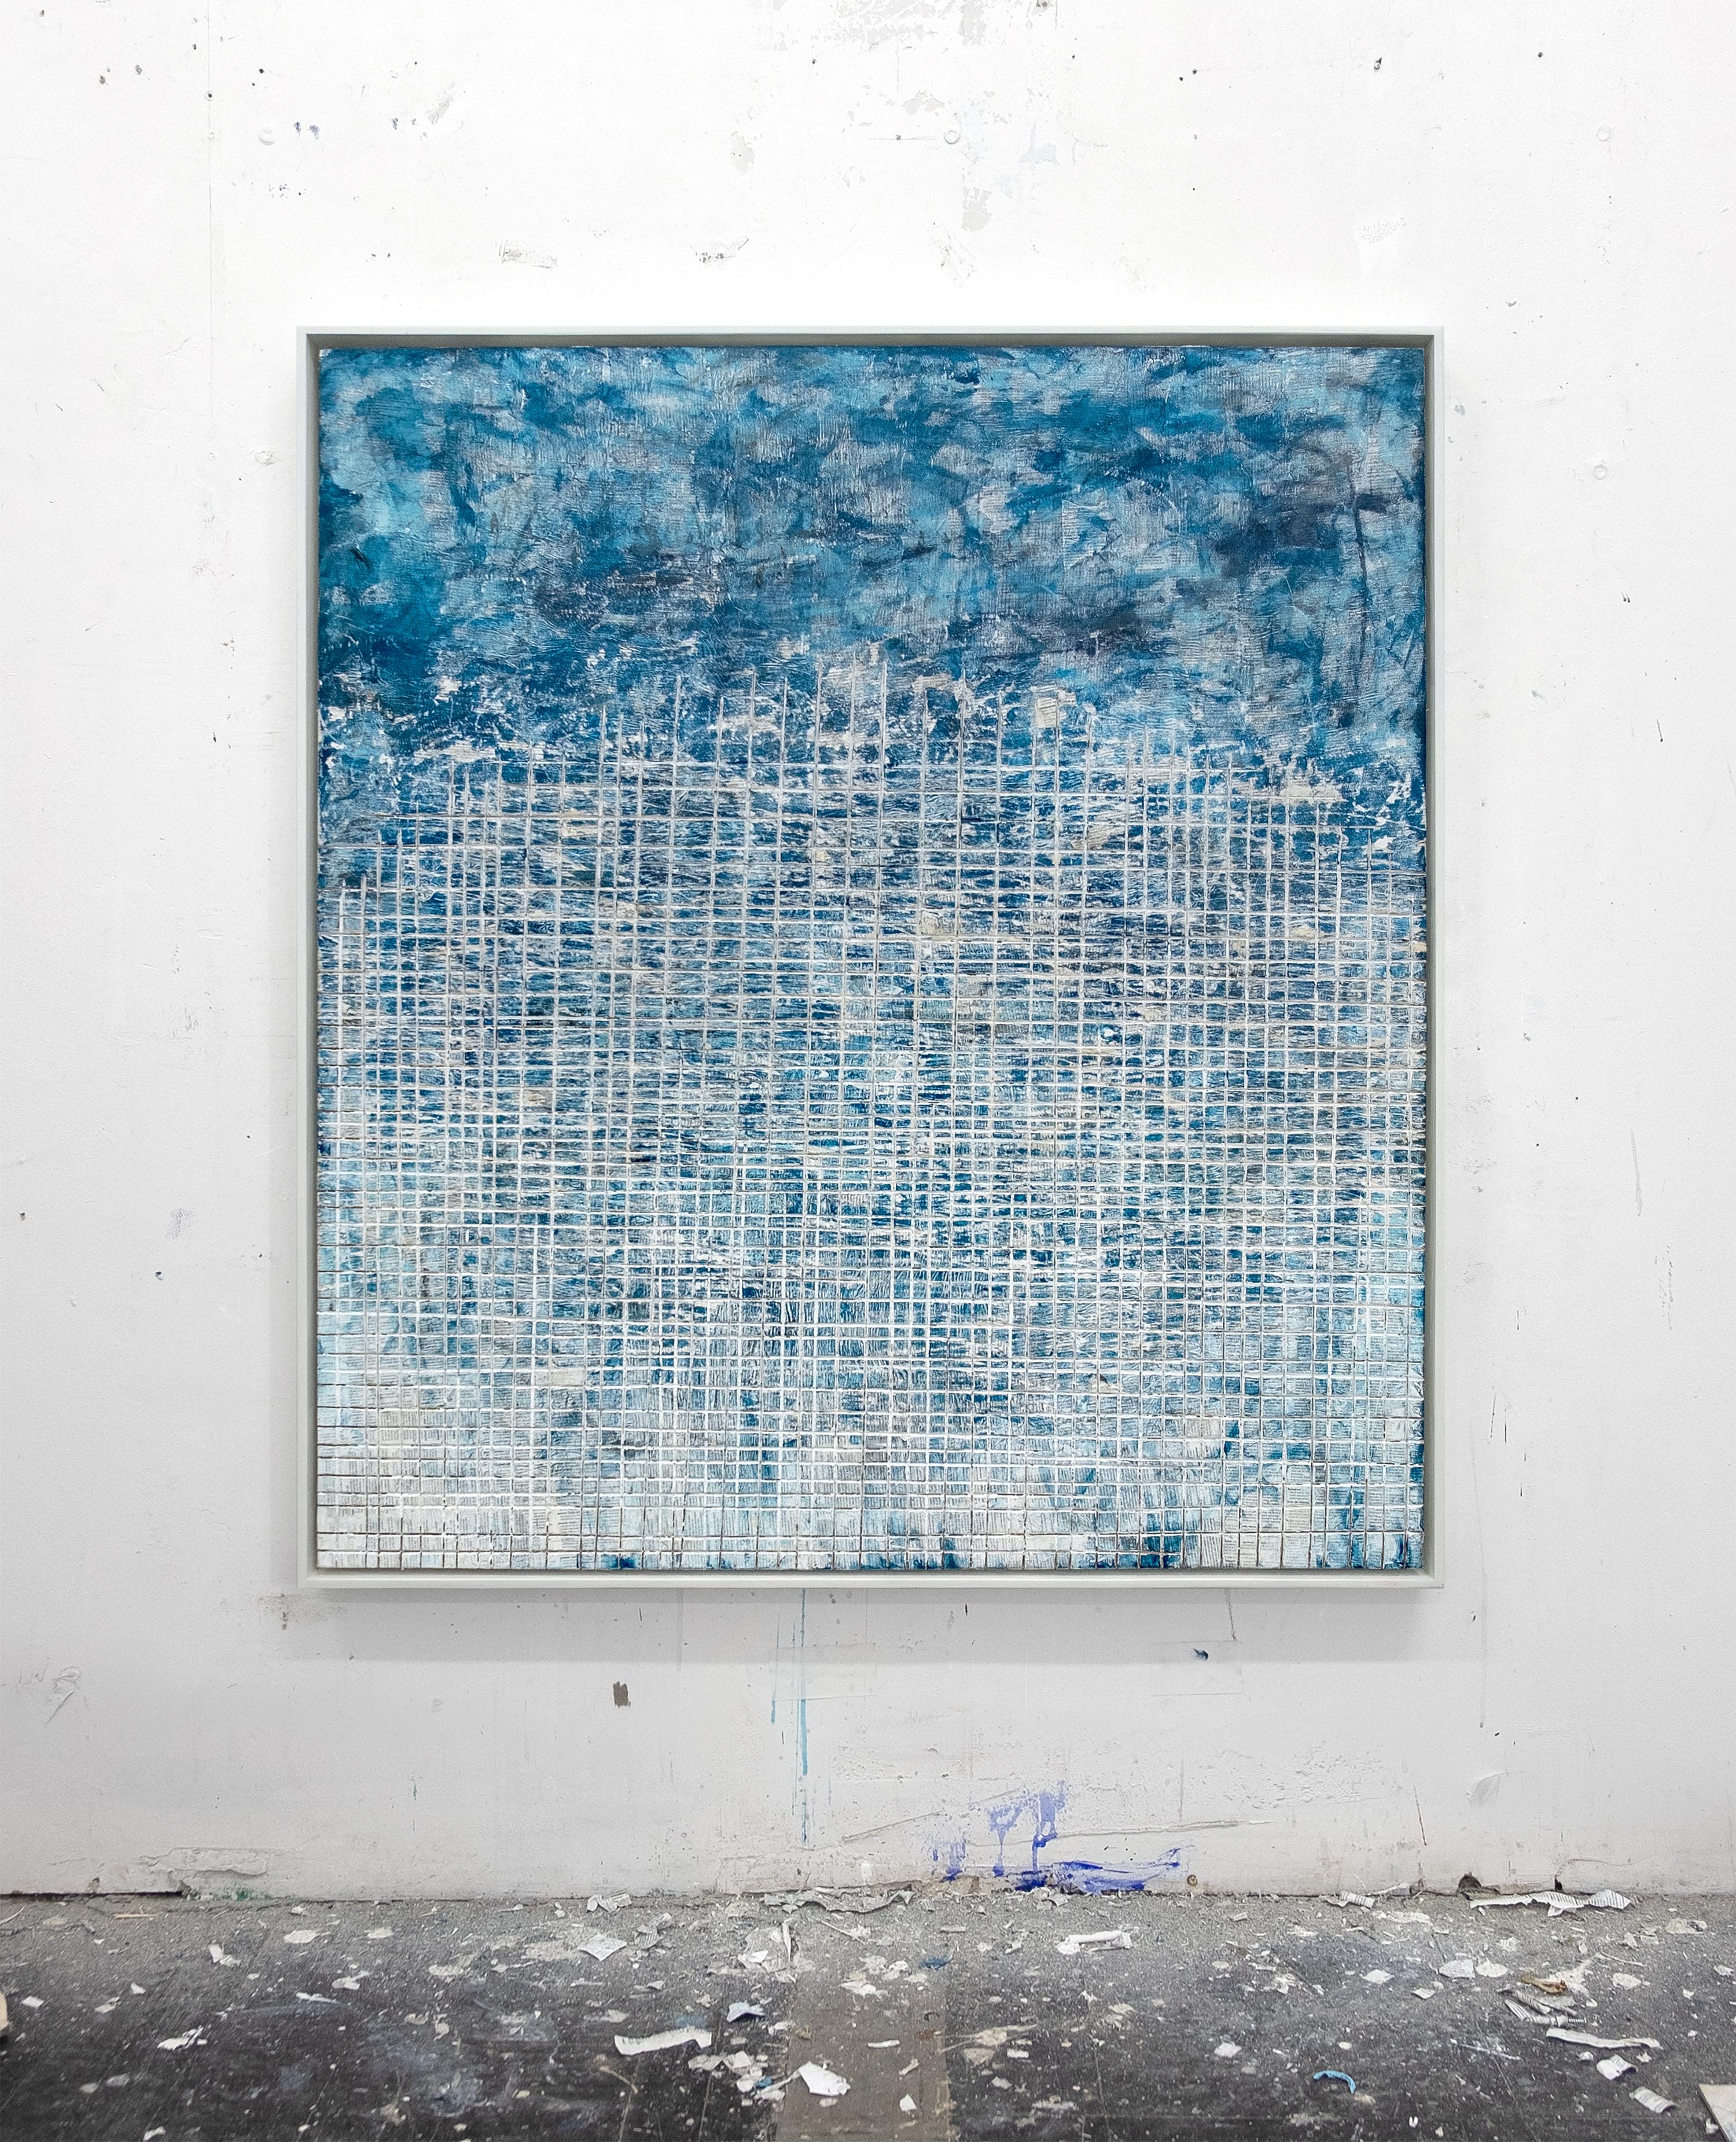 Cultural Scream- street art blue and white abstract framed carved painting  - Painting by David Fredrik Moussallem